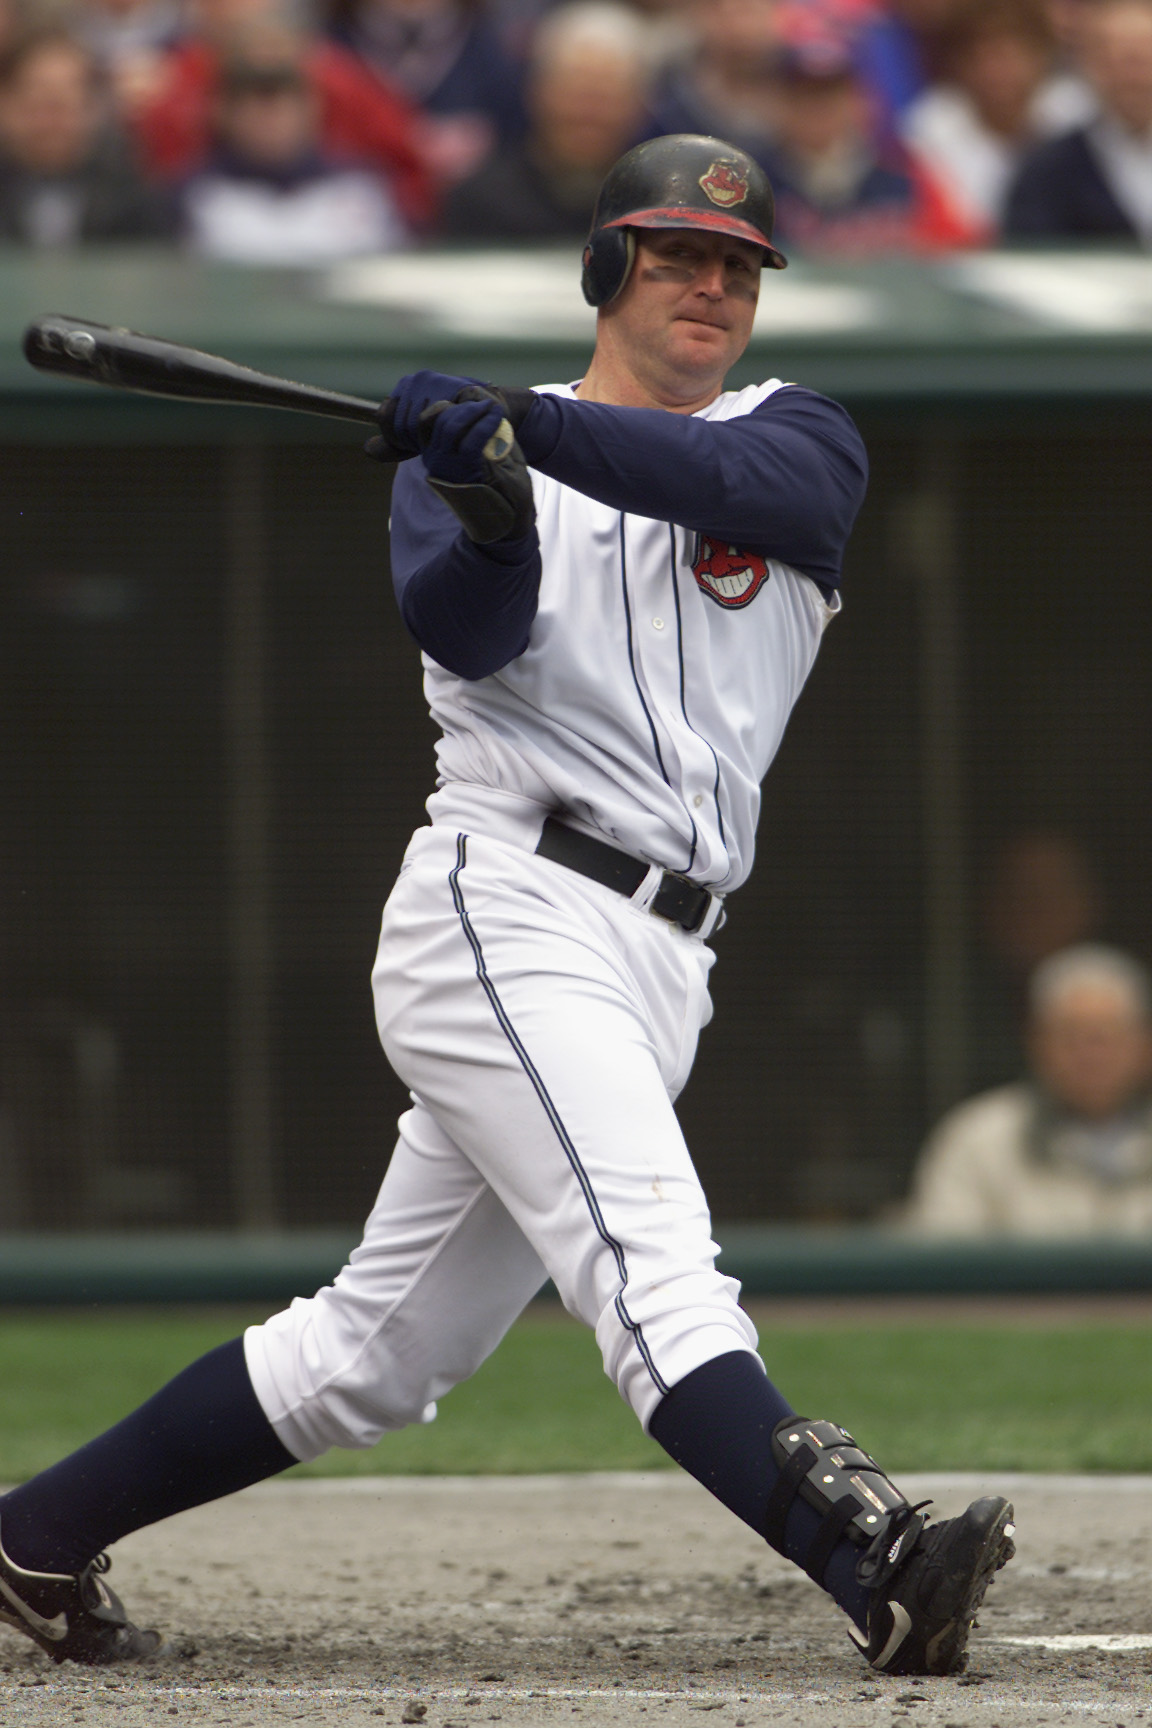 08  Apr 2002 :  Jim Thome #25 of the Cleveland Indians in action against  the Minnesota Twins during the opening day game at Jacobs Field in Cleveland, Ohio. The Indians won 9-5. DIGITAL IMAGE. Mandatory Credit: Tom Pidgeon /Getty Images